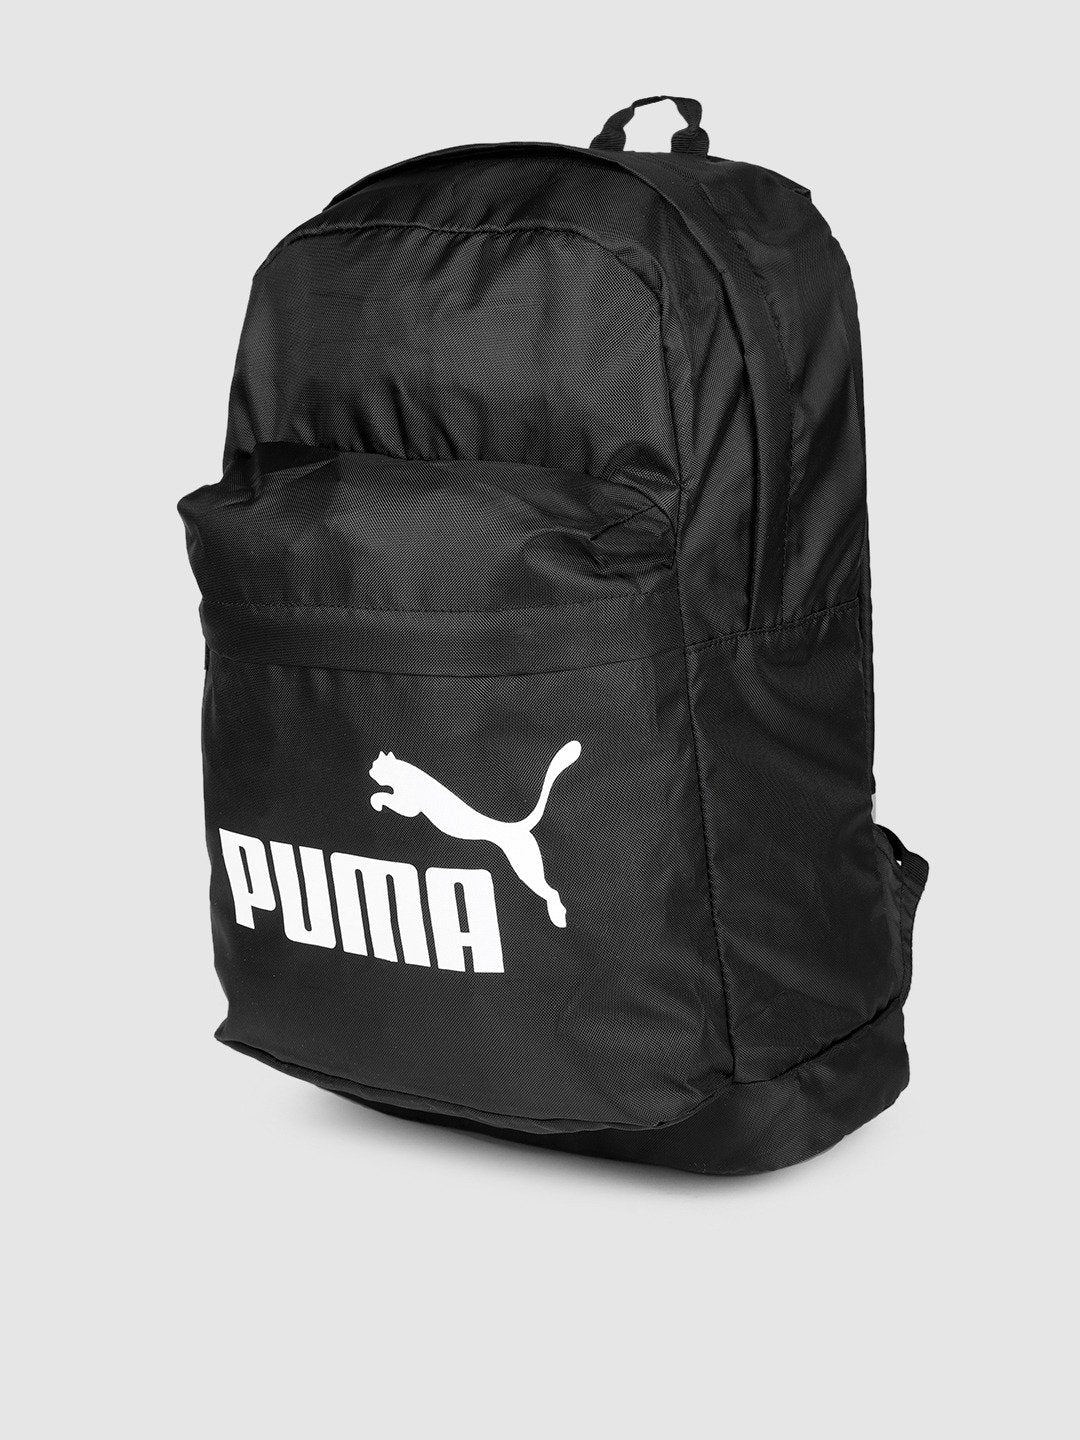 Unisex Black Solid Backpack - Discount Store